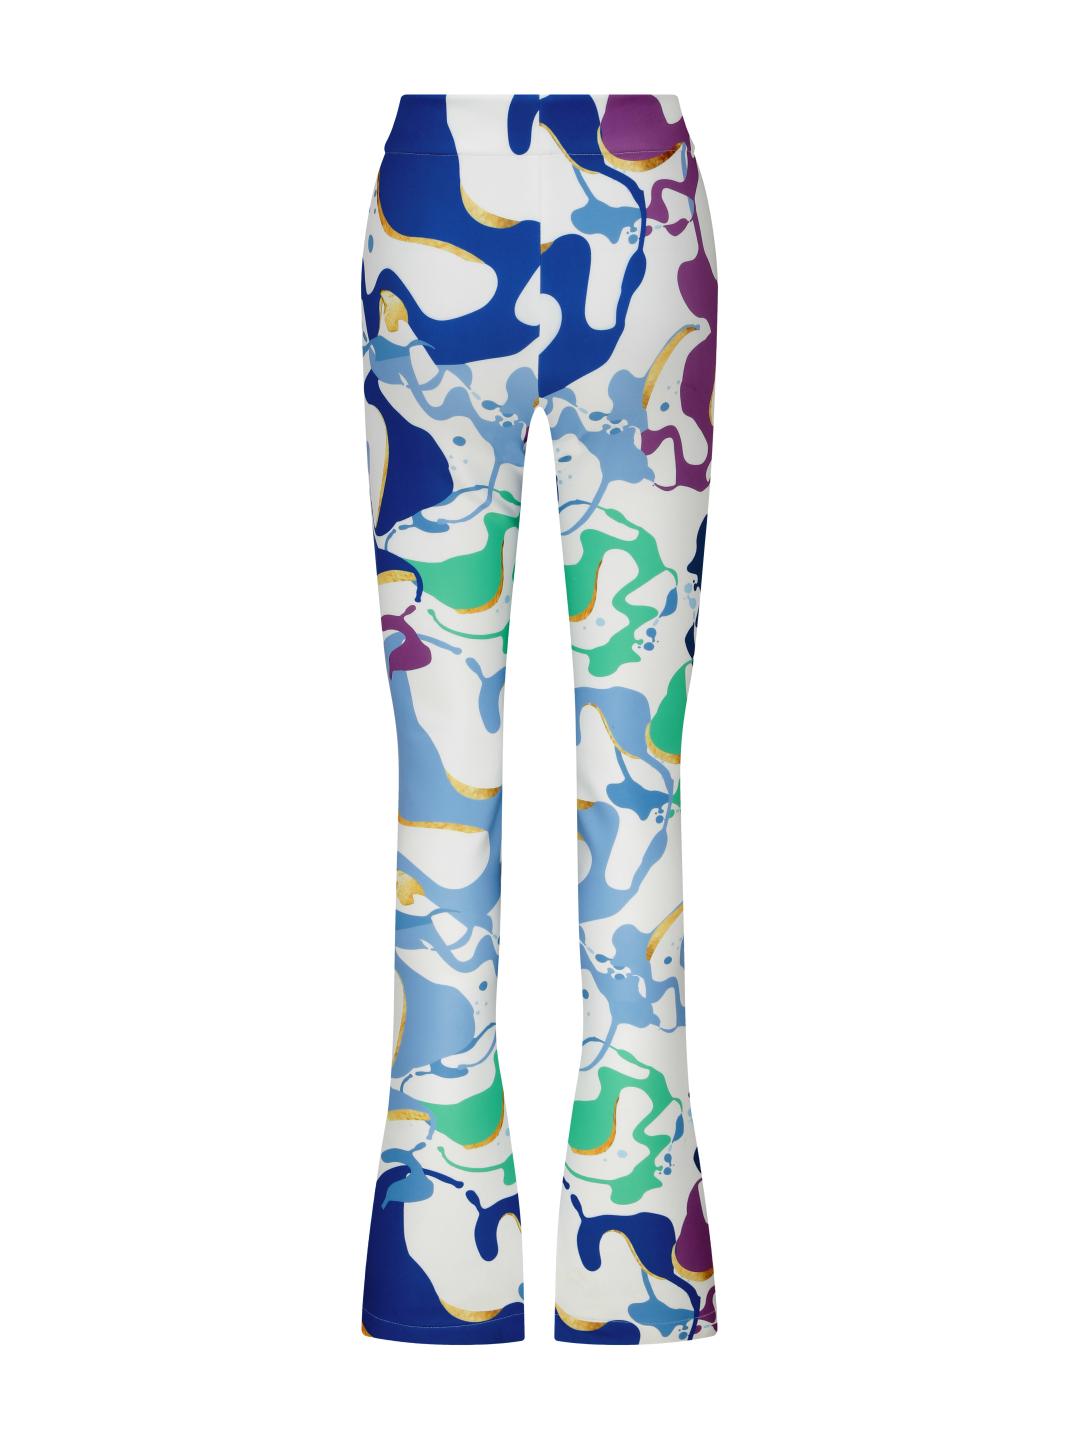 SAX PATTERNED TROUSERS